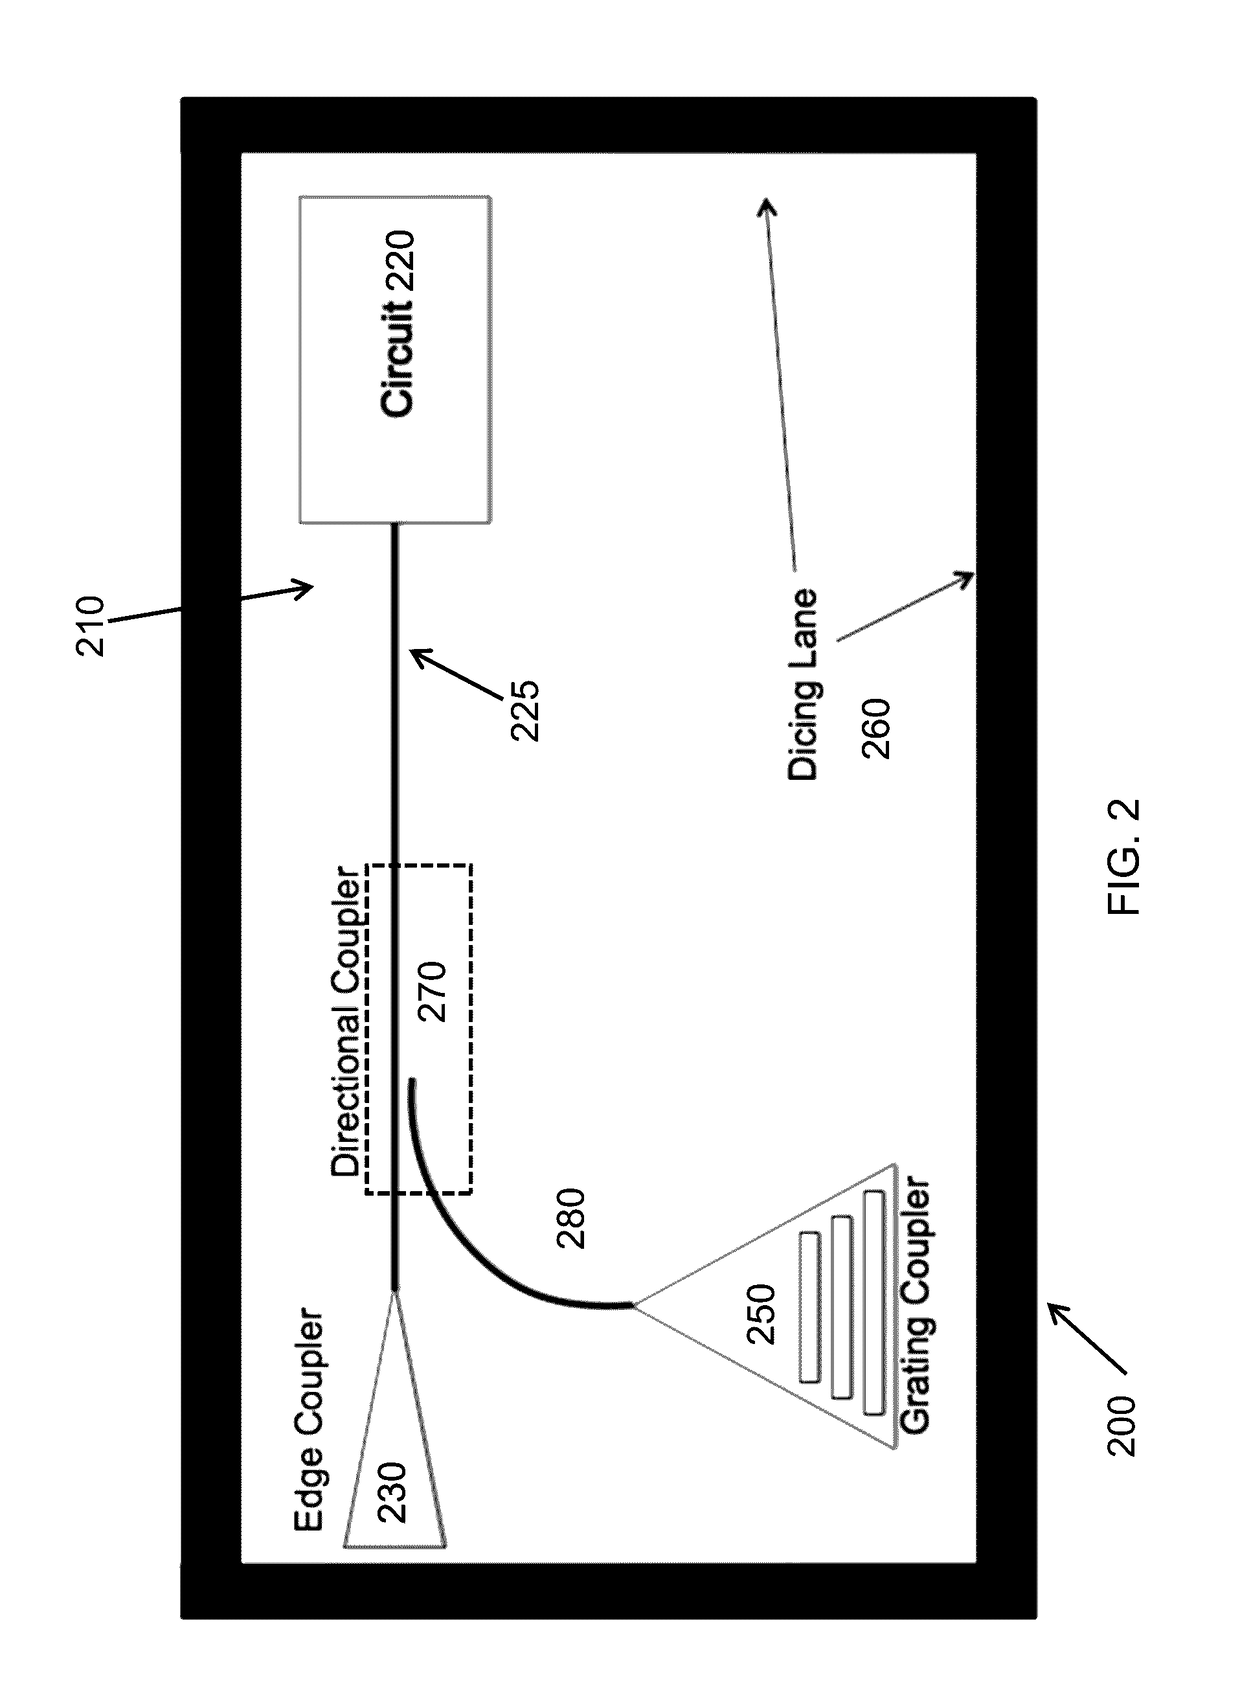 Test systems and methods for chips in wafer scale photonic systems